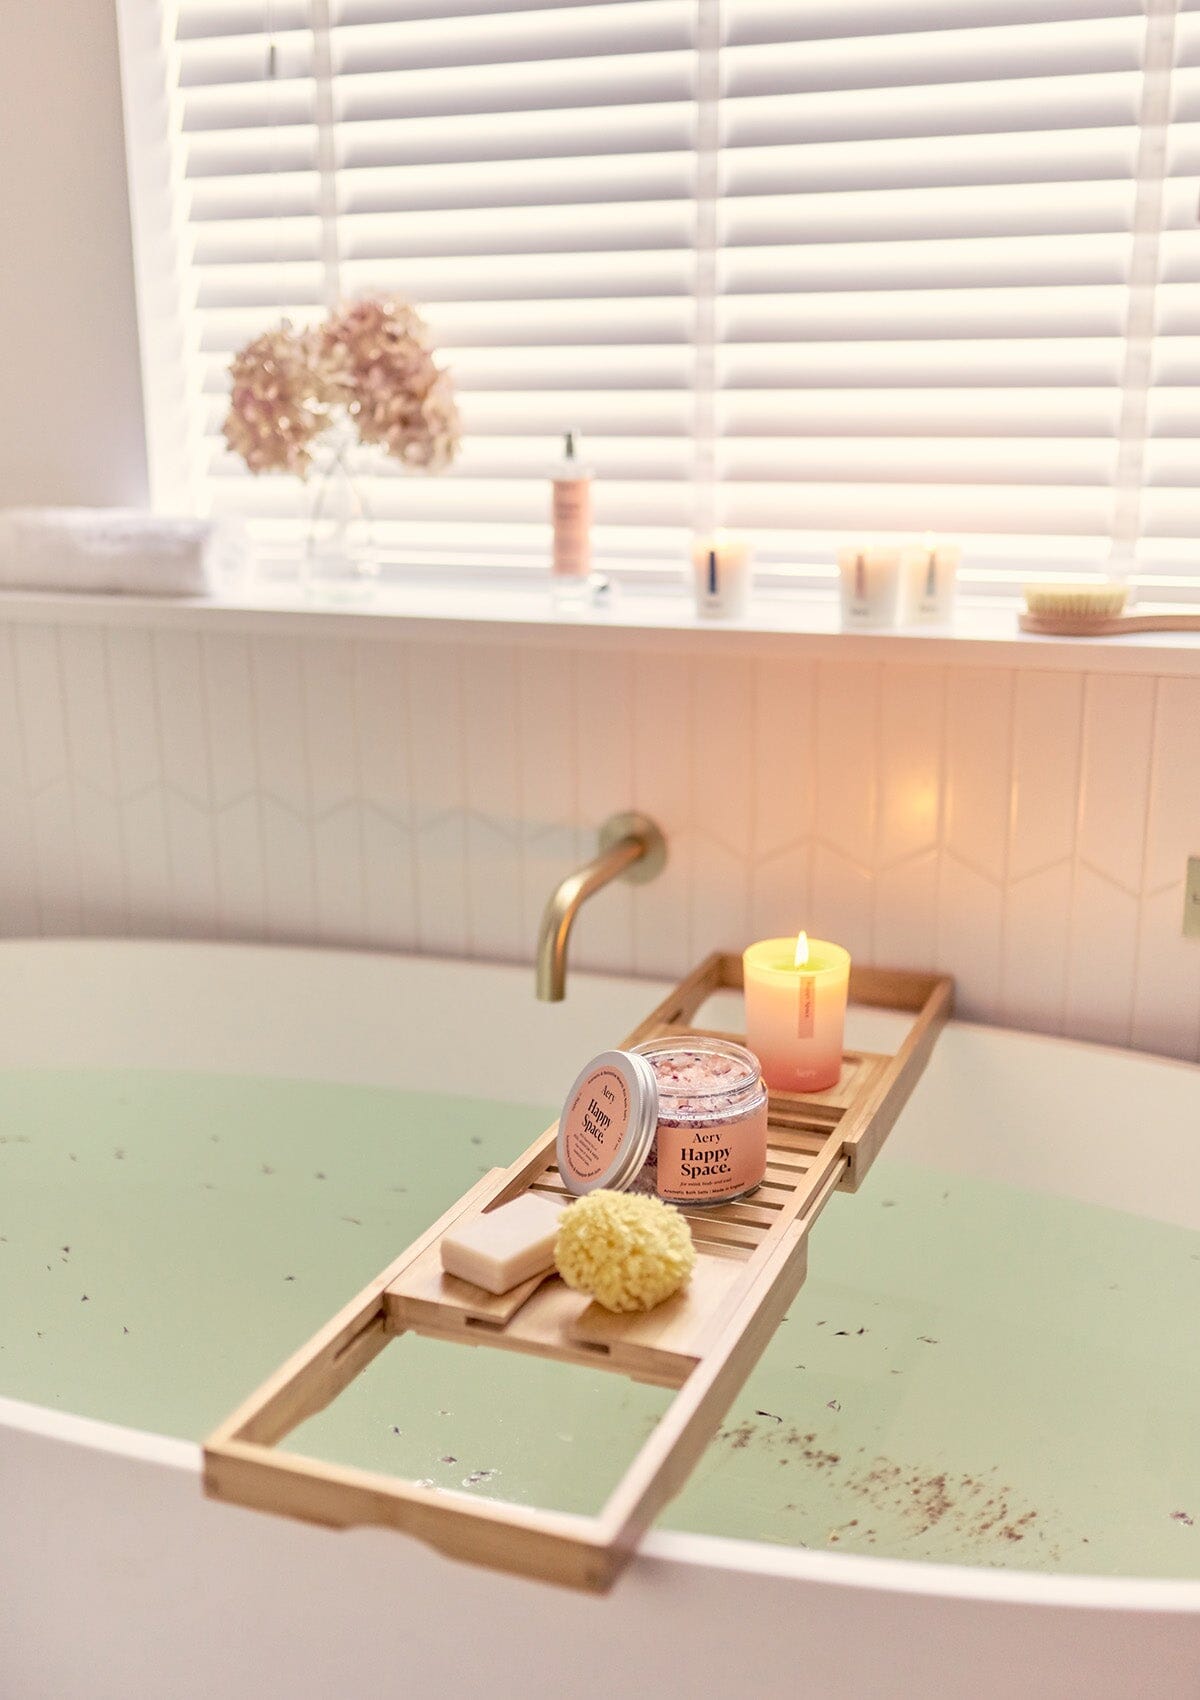 Pink Happy Space bath salts by Aery displayed next to Happy Space candle on wooden bath tray in bathroom 